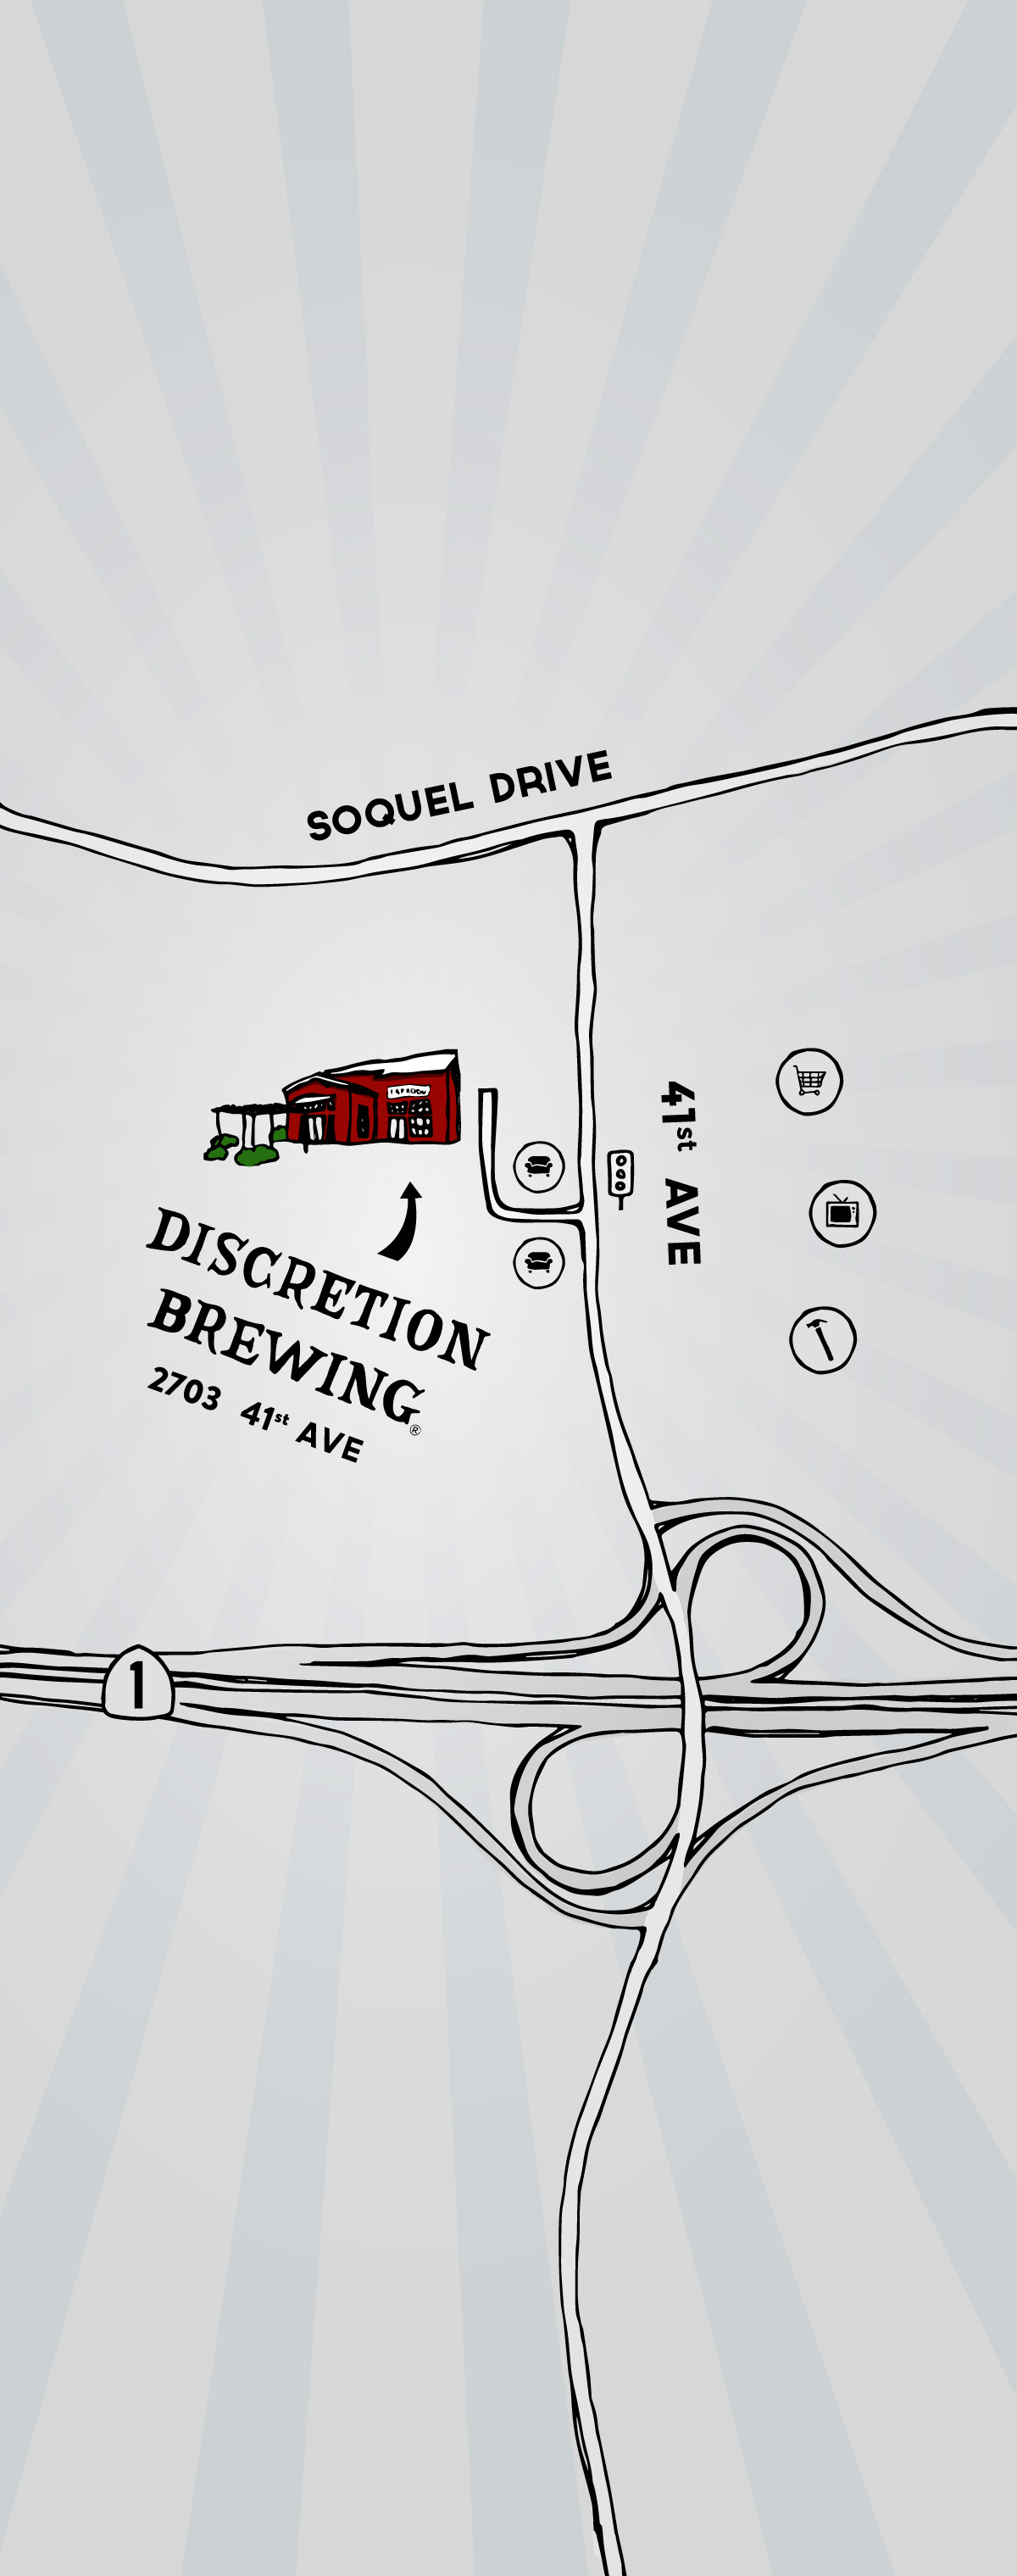 Illustrated map of of Discretion Brewing locaiton